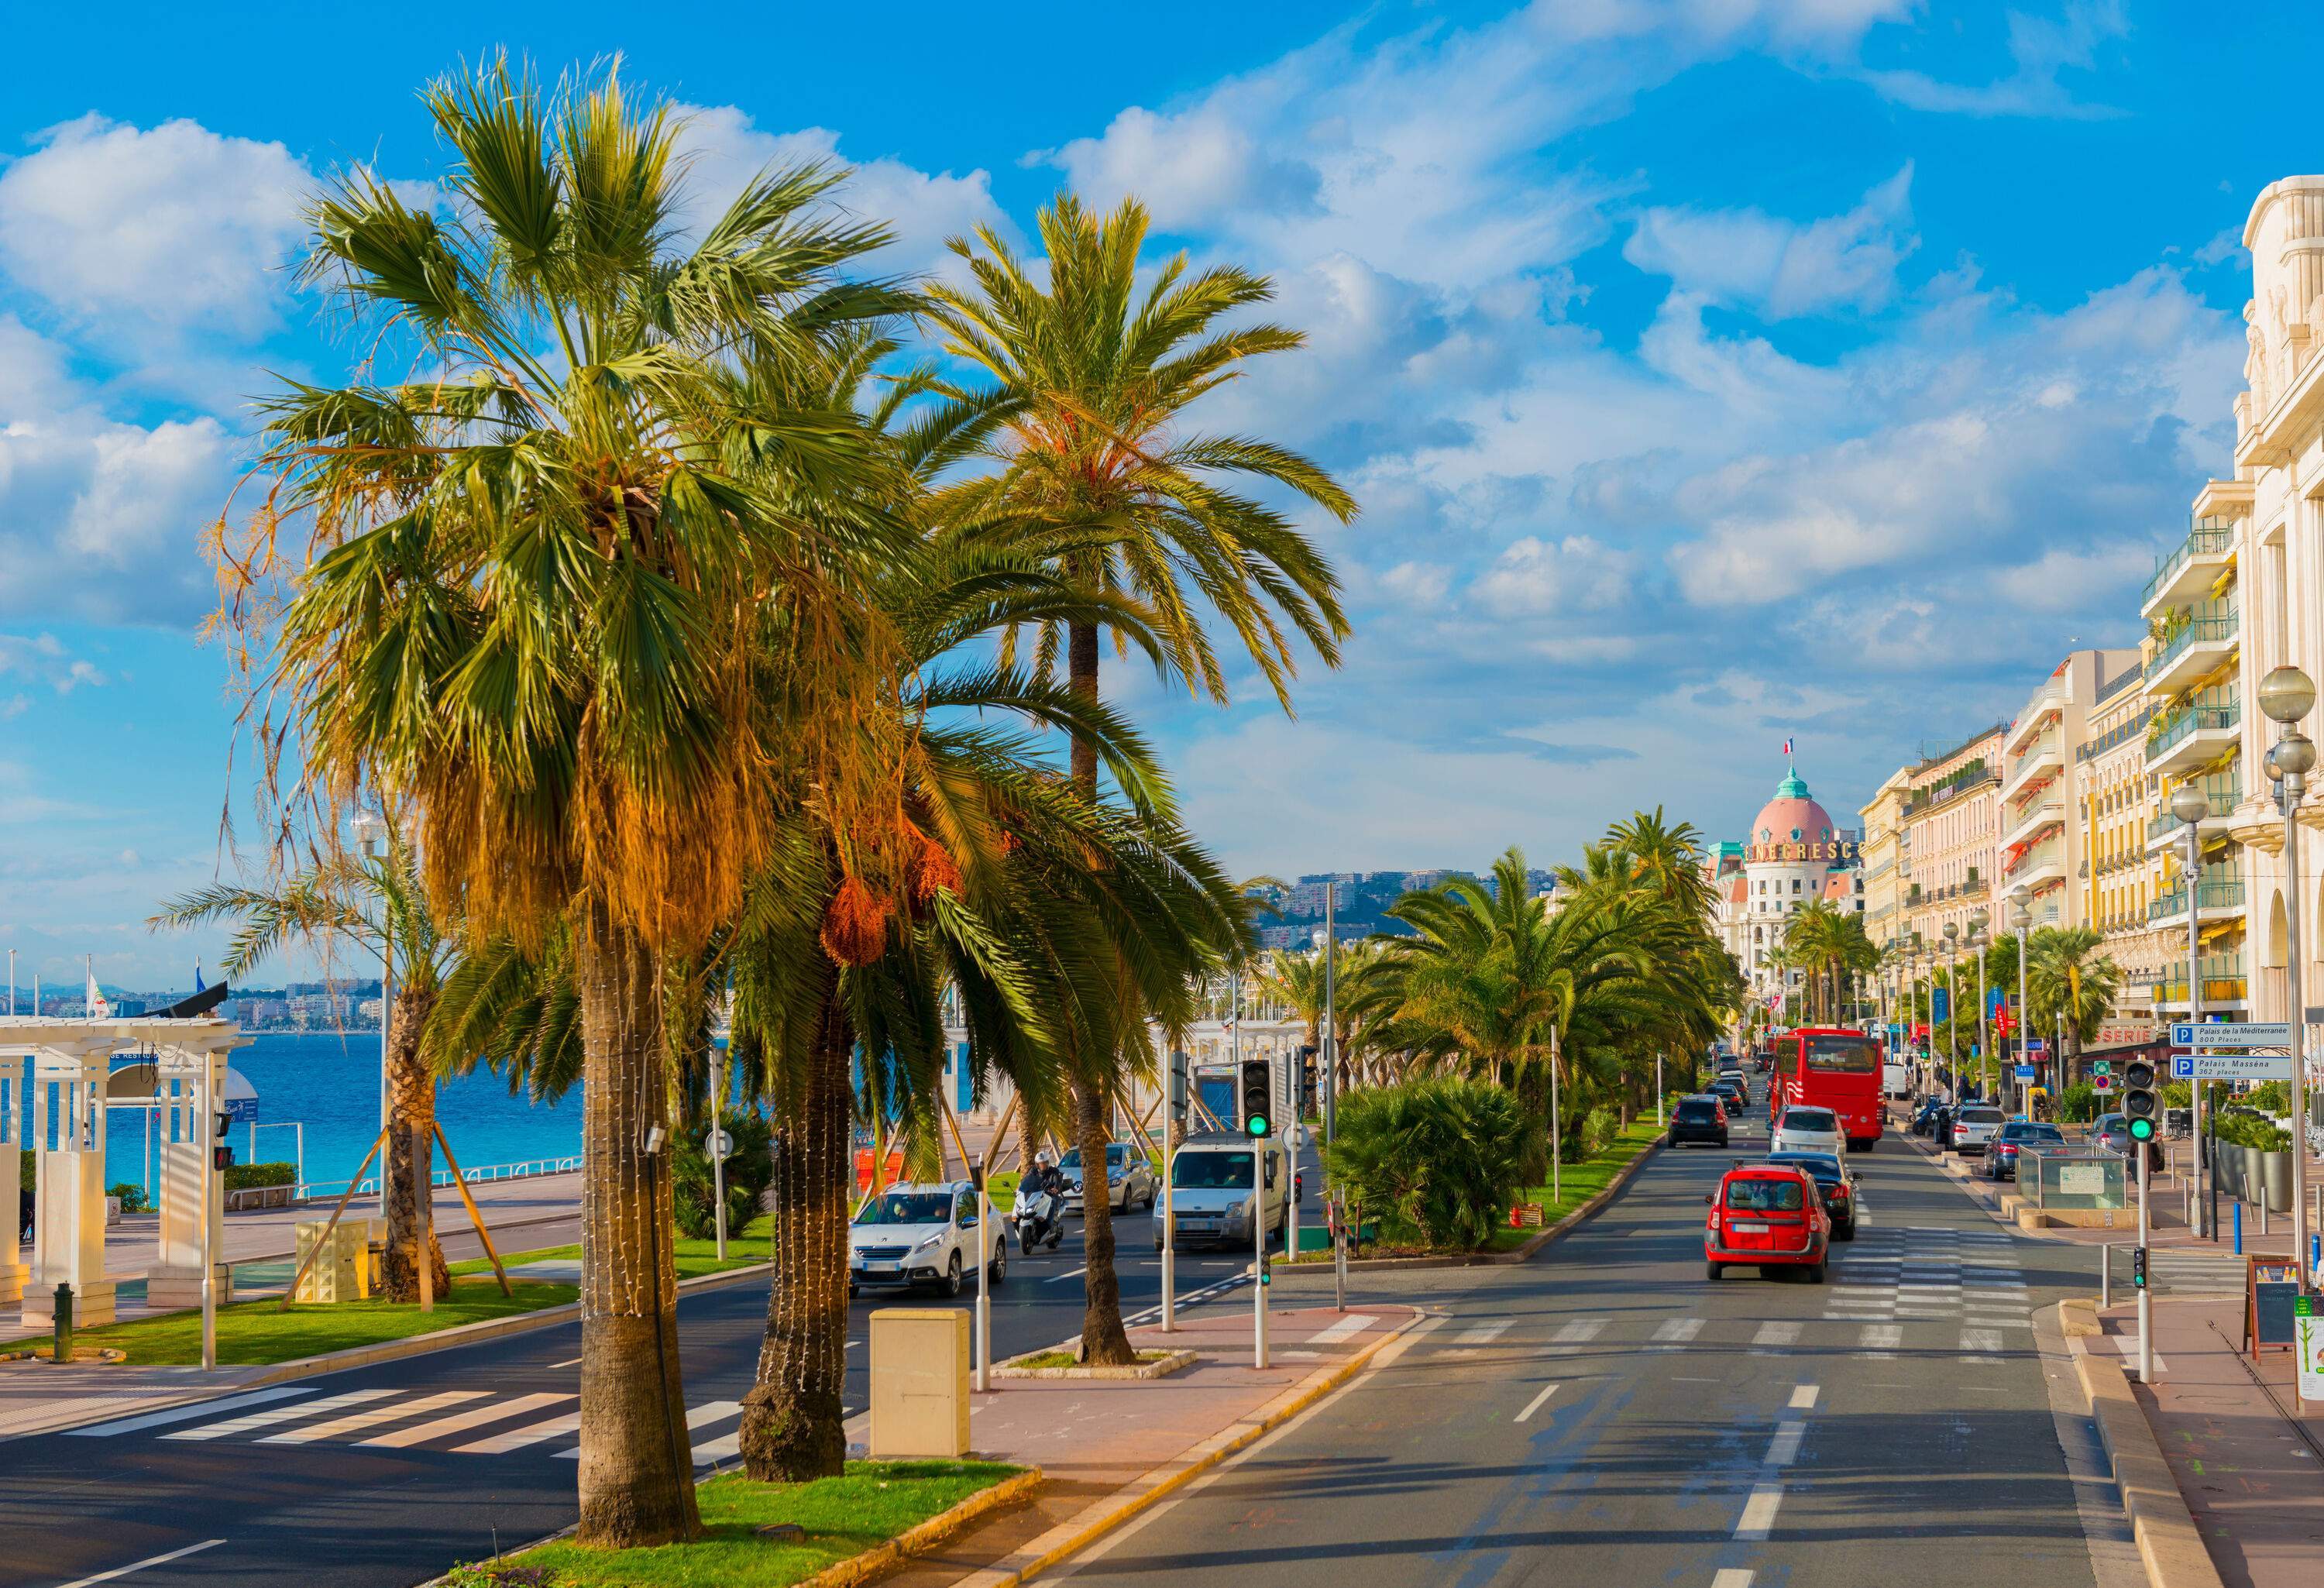 The roads by the beach are lined with tall green trees and classic buildings.